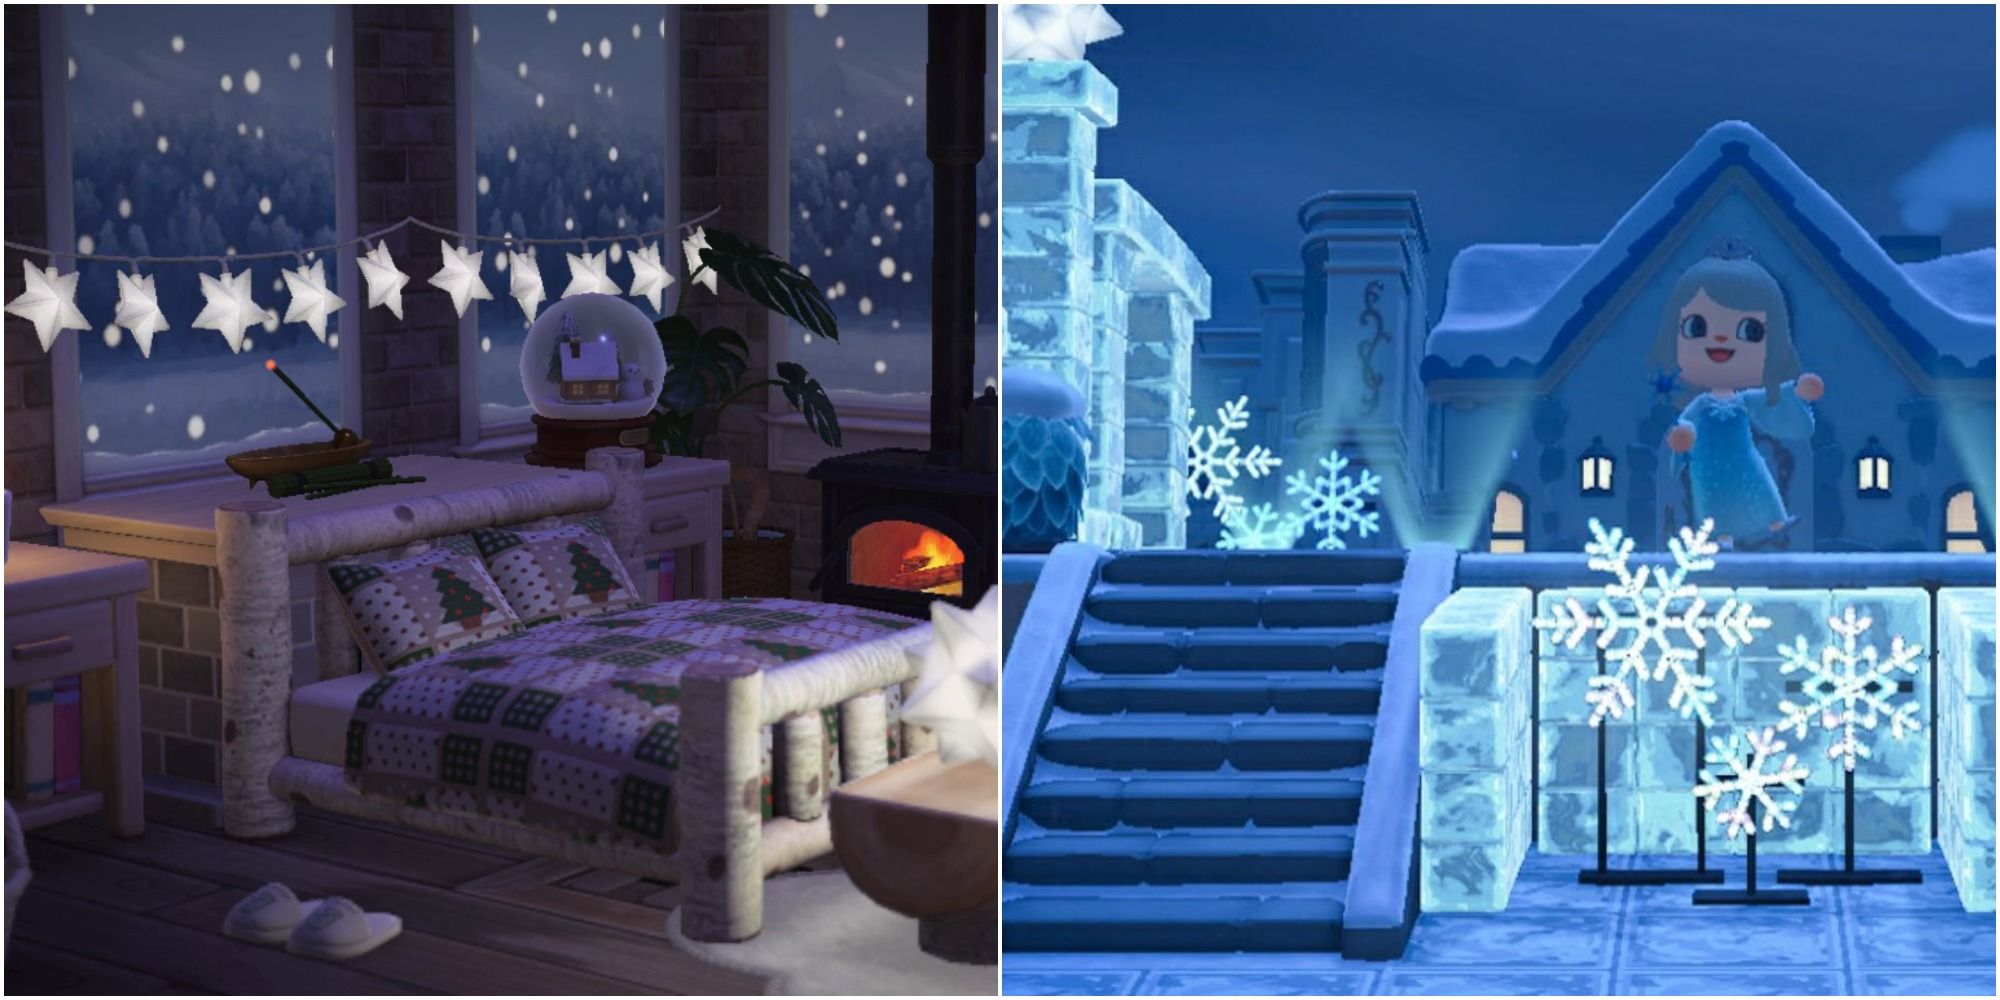  Animal Crossing new horizons night log cabin ice castle with frozen furniture